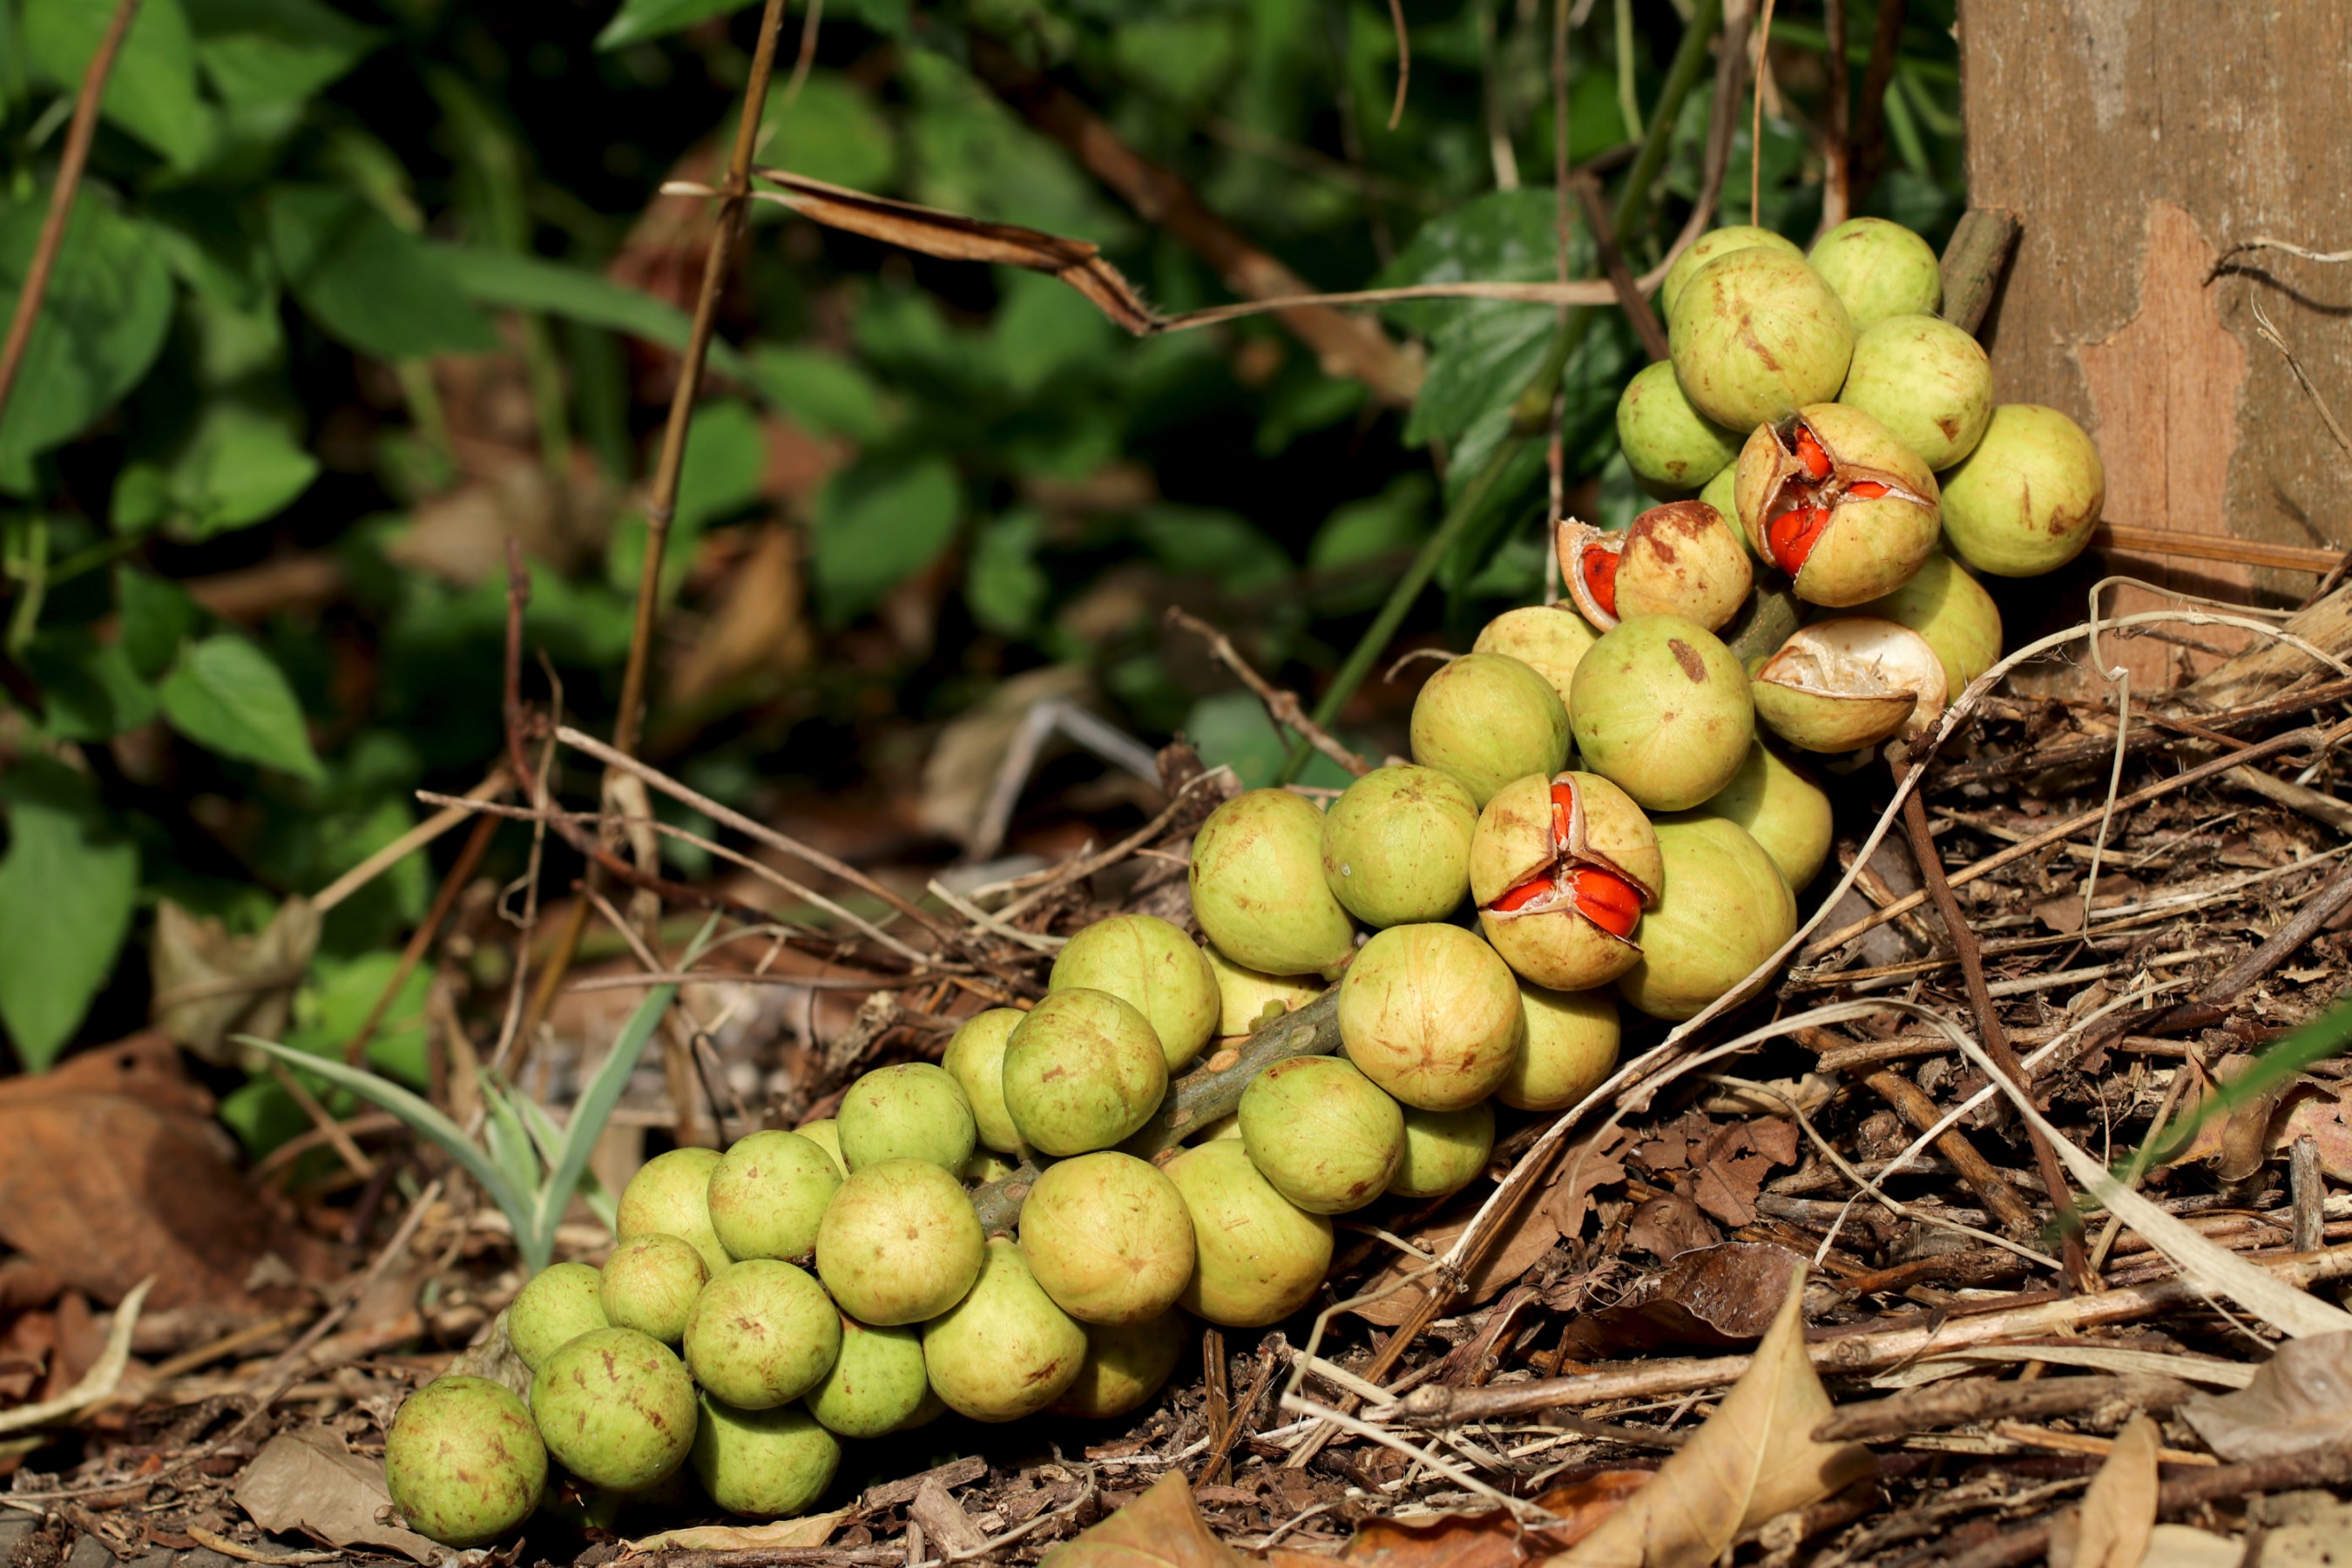 The fruits of A. polystachya appear in big clusters that dangle the length of a forearm